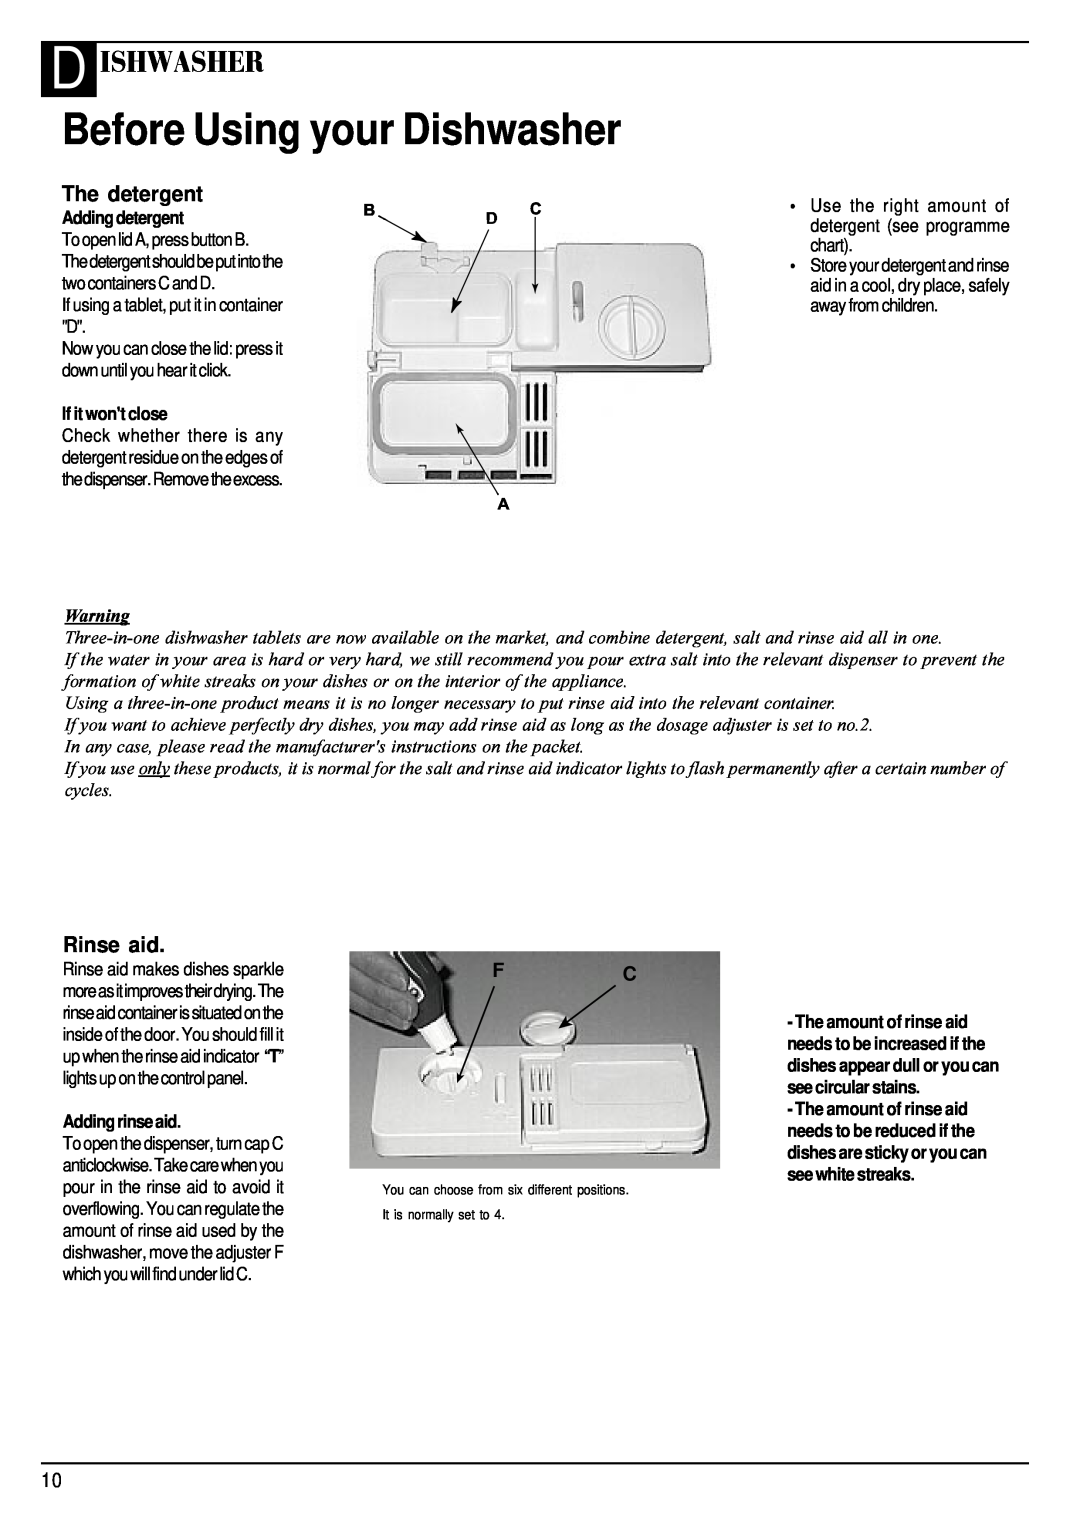 Hotpoint BFZ 680 manual Before Using your Dishwasher, D Ishwasher, The detergent, Rinse aid 